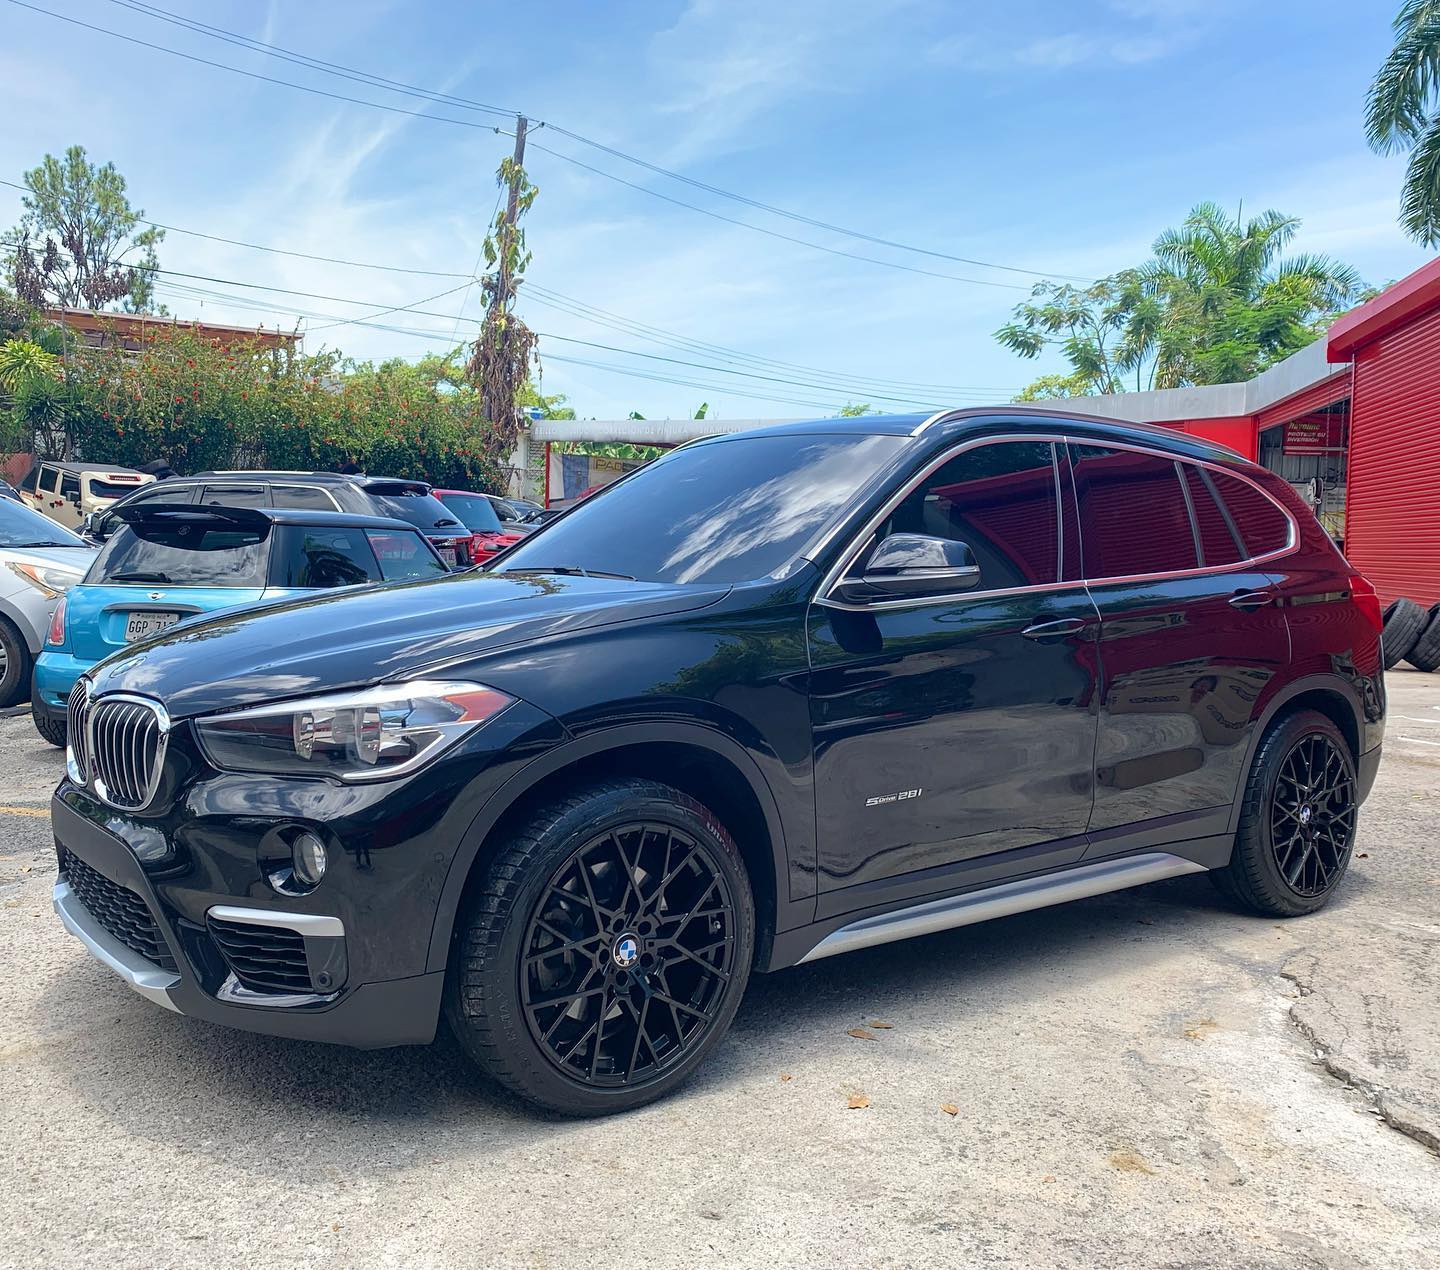 https://wheelfront.com/wp-content/uploads/formidable/8/bmw-x1-f48-with-tsw-sebring-19x8.5-aftermarket-wheels-1.jpg